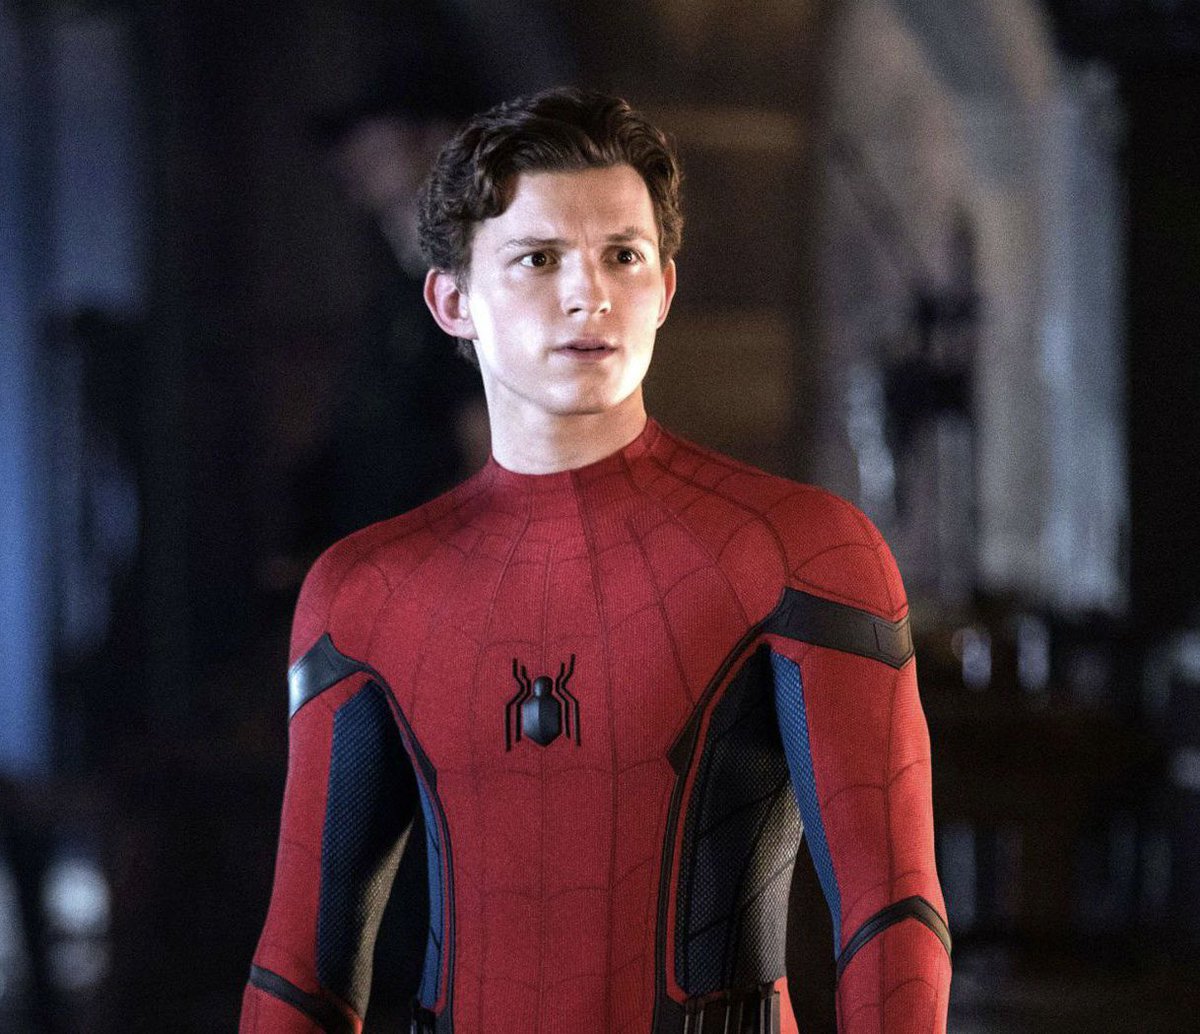 RT @therealsupes: Tom Holland as Spider-Man & Joe Keery as Johnny Storm would break the internet. https://t.co/7ZqlUJdkPe